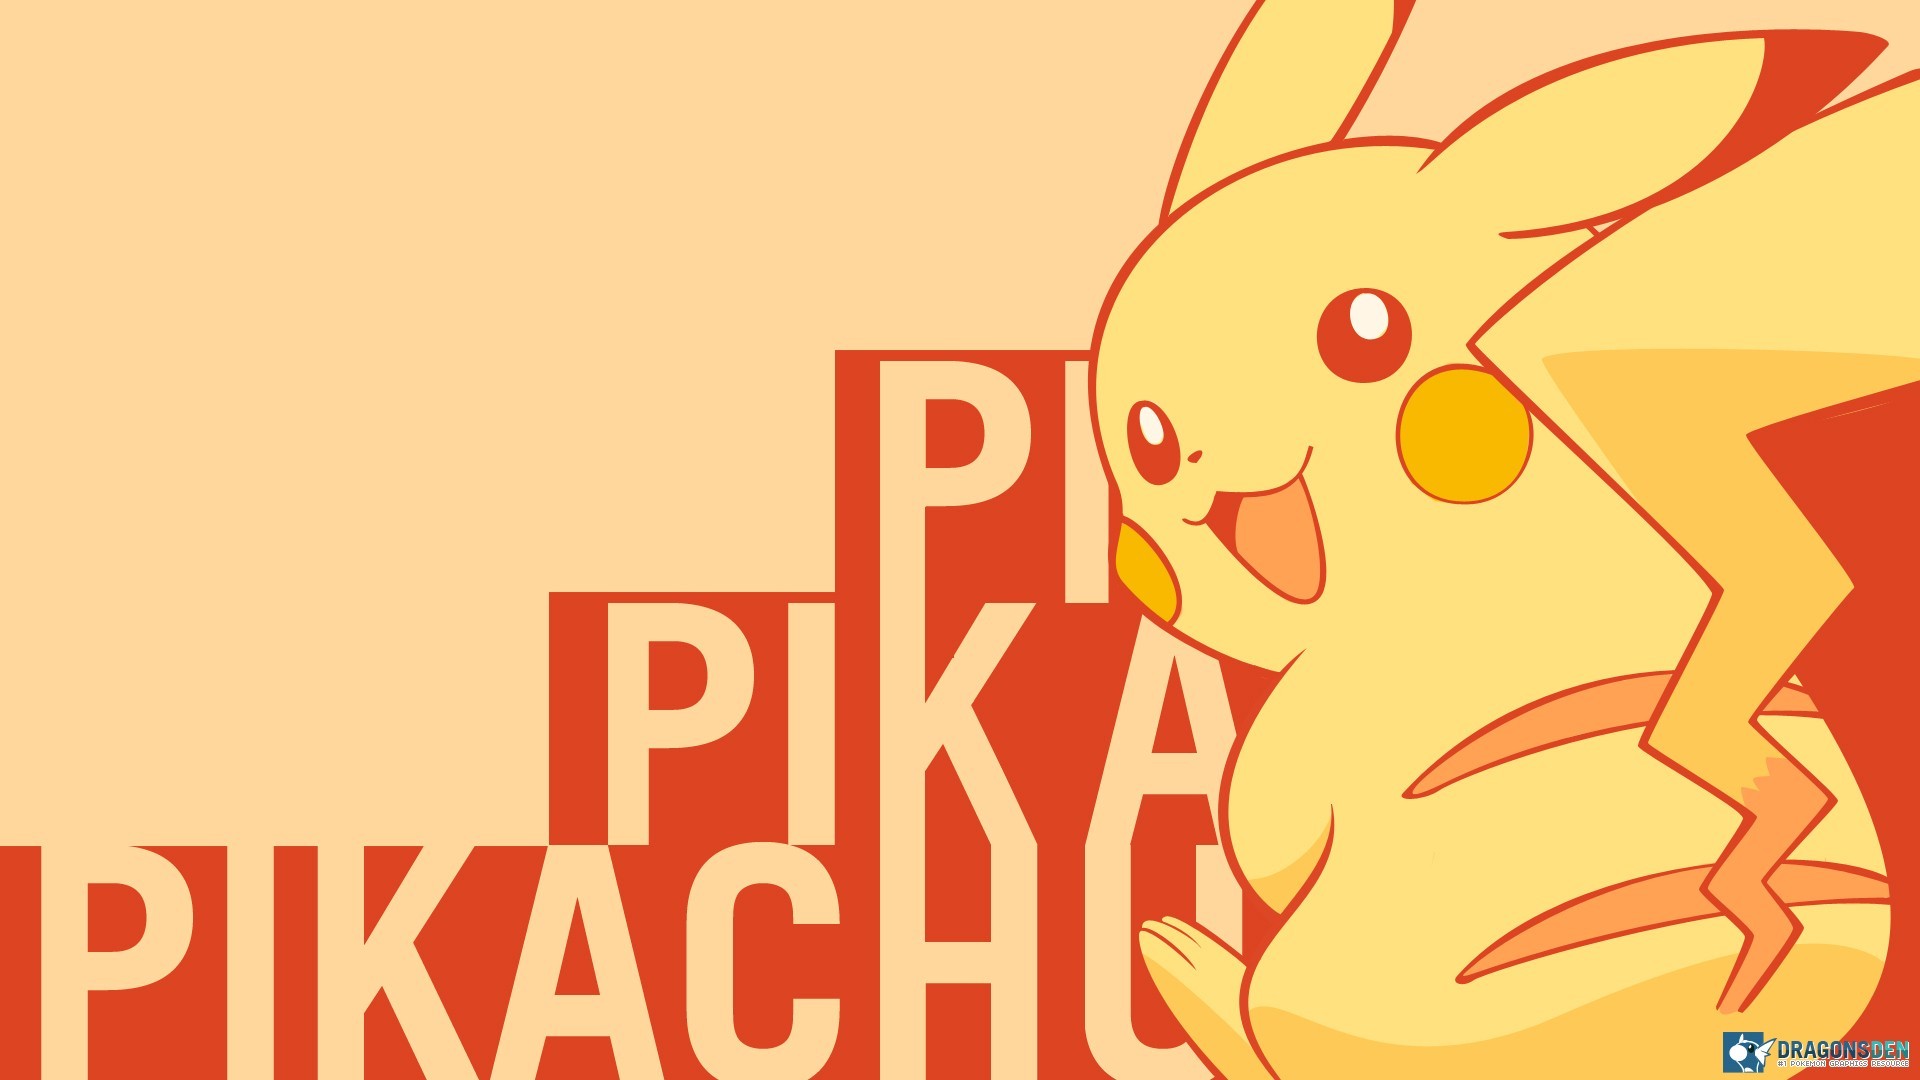 Free download pikachu backgrounds